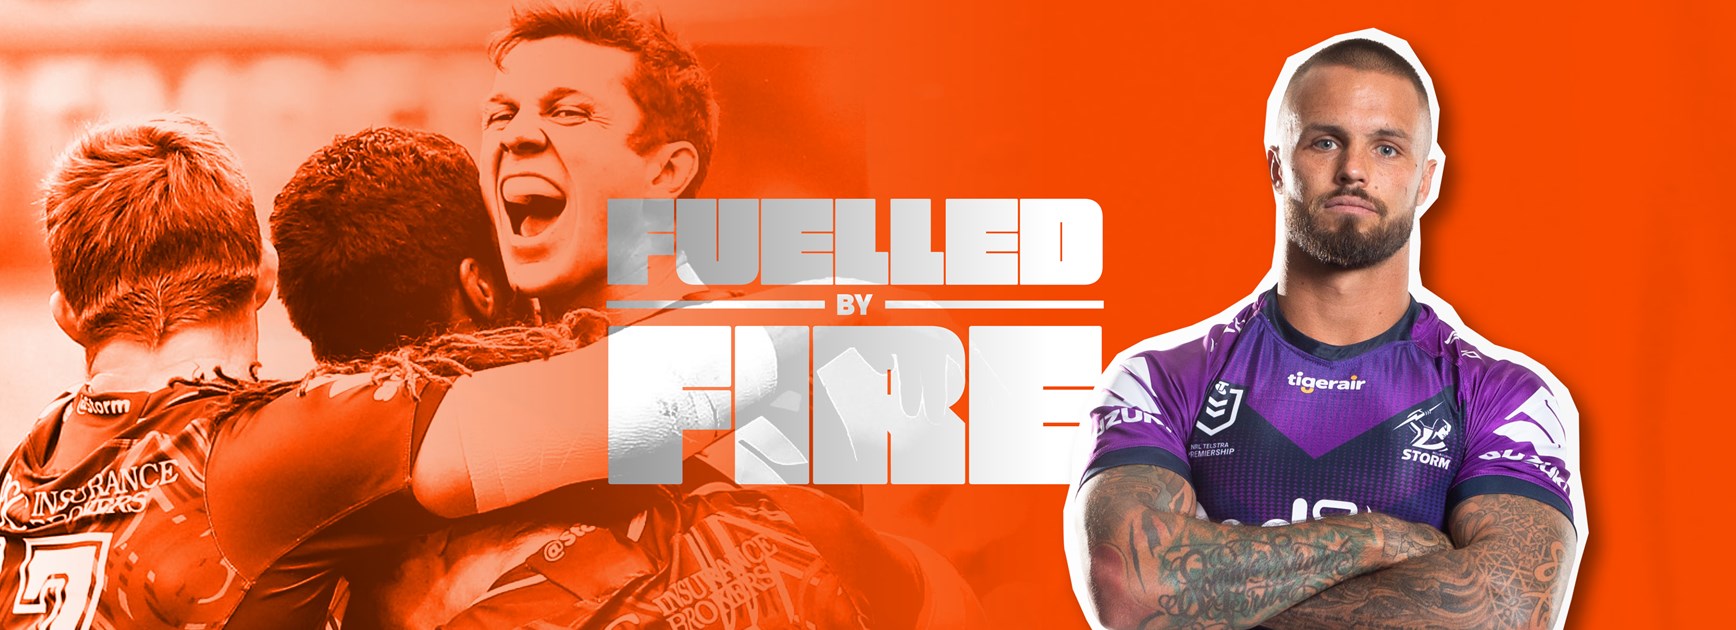 Podcast: Matt Duffie on Fuelled by Fire with Sandor Earl